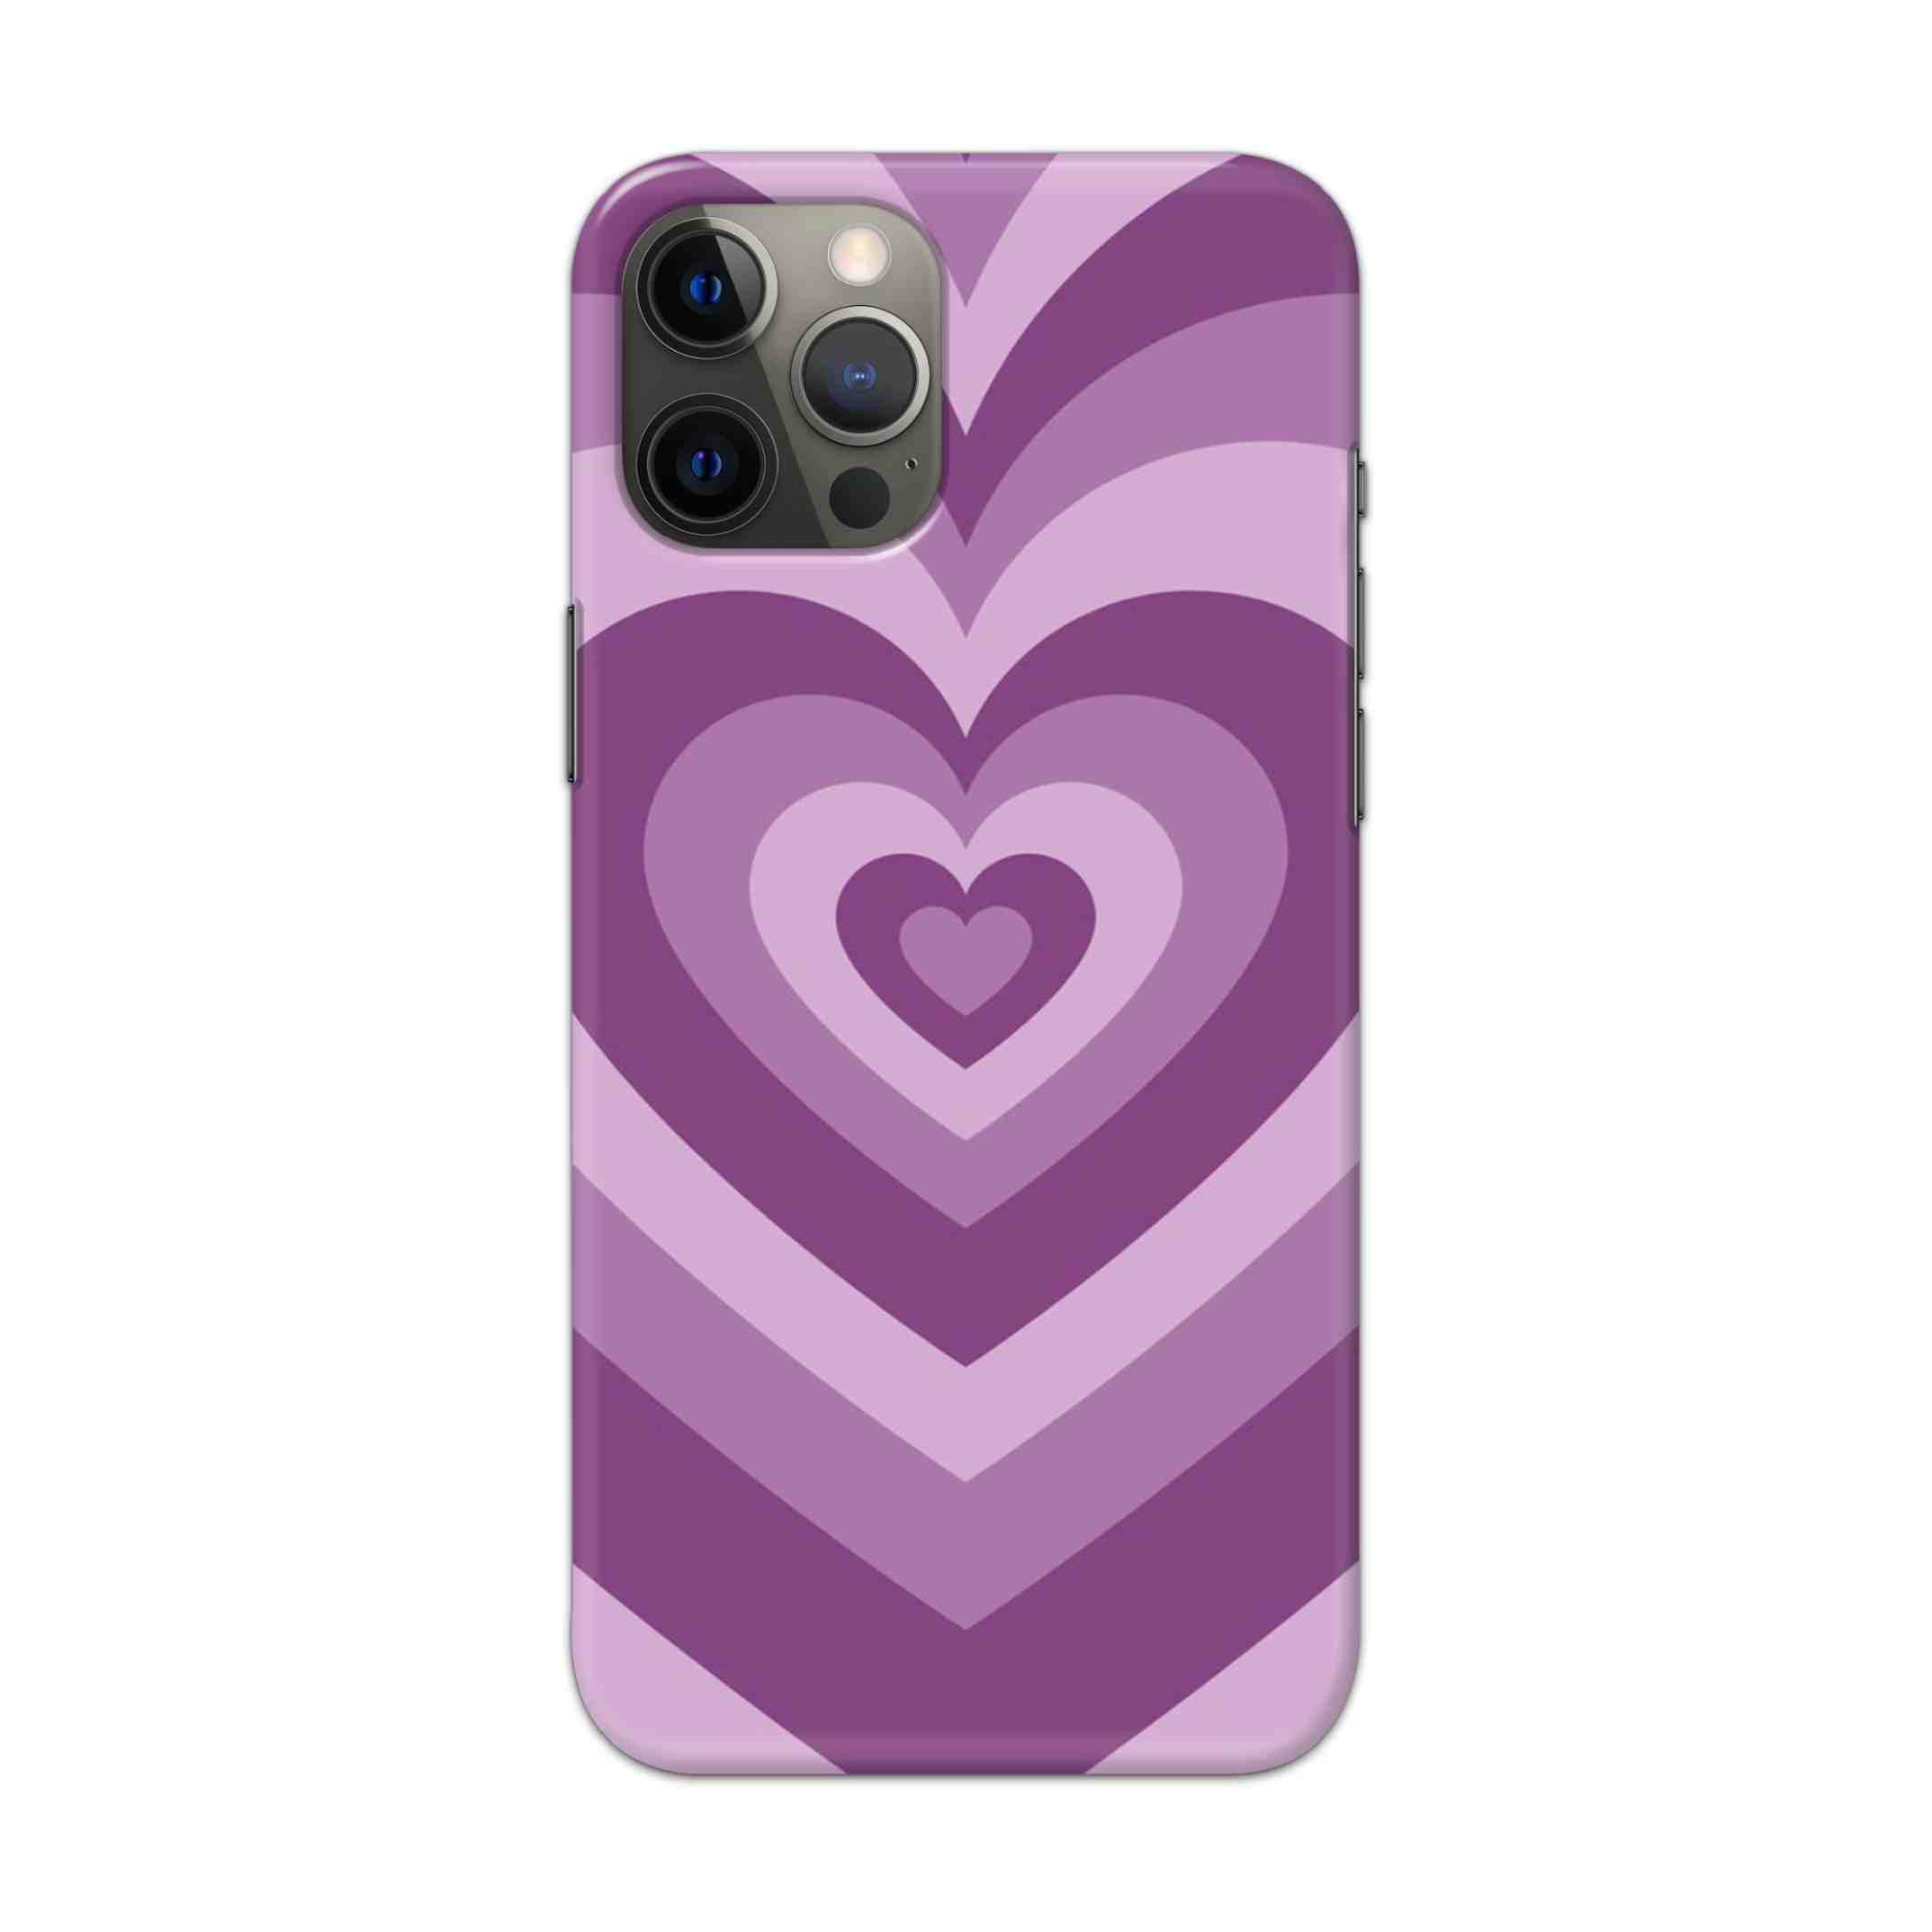 Buy Purple Heart Hard Back Mobile Phone Case Cover For Apple iPhone 12 pro Online